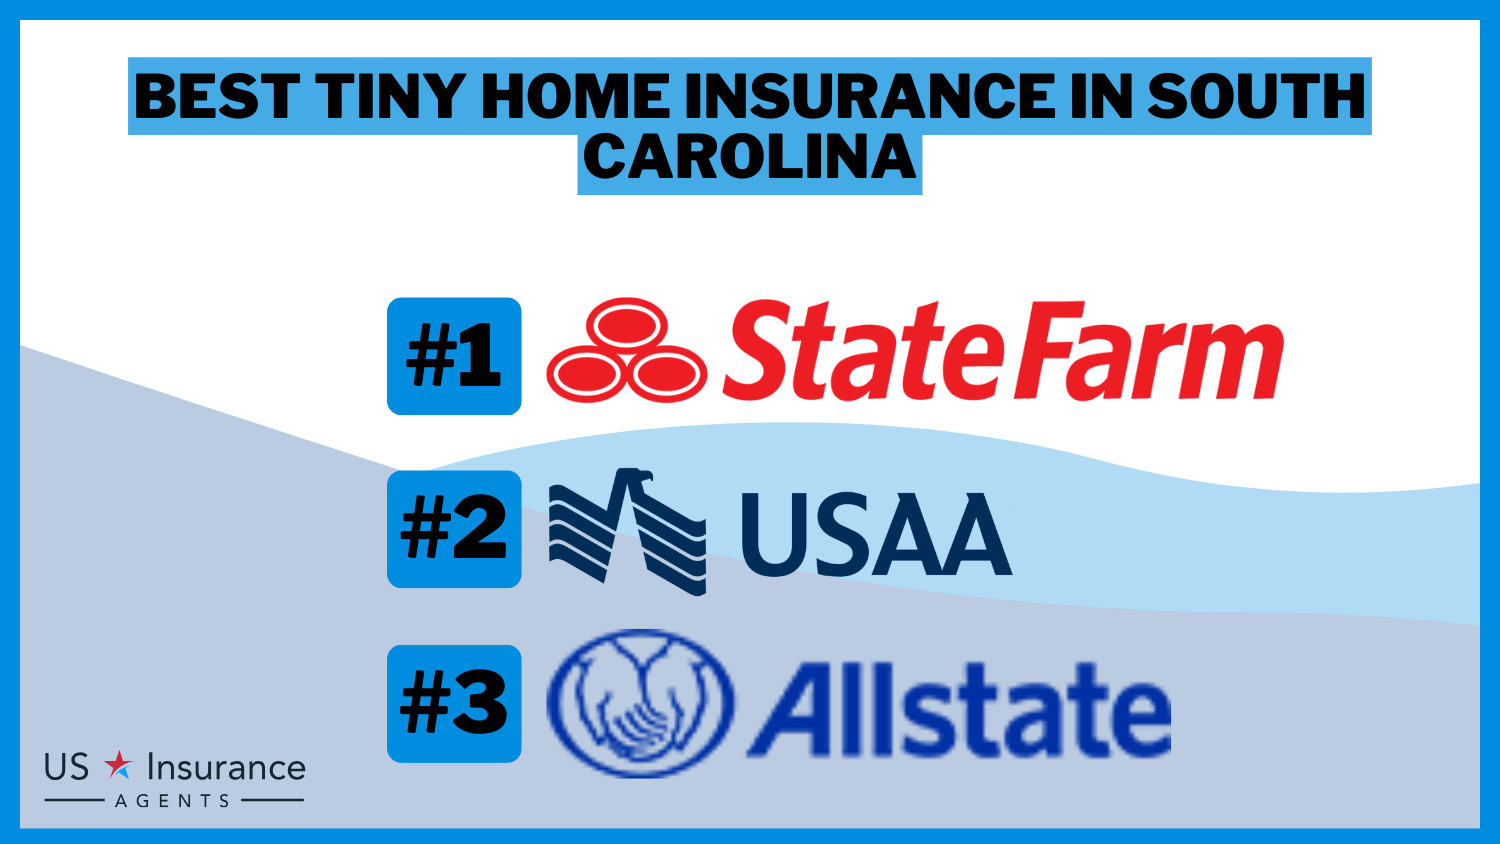 Best Tiny Home Insurance in South Carolina: State Farm, USAA, and Allstate